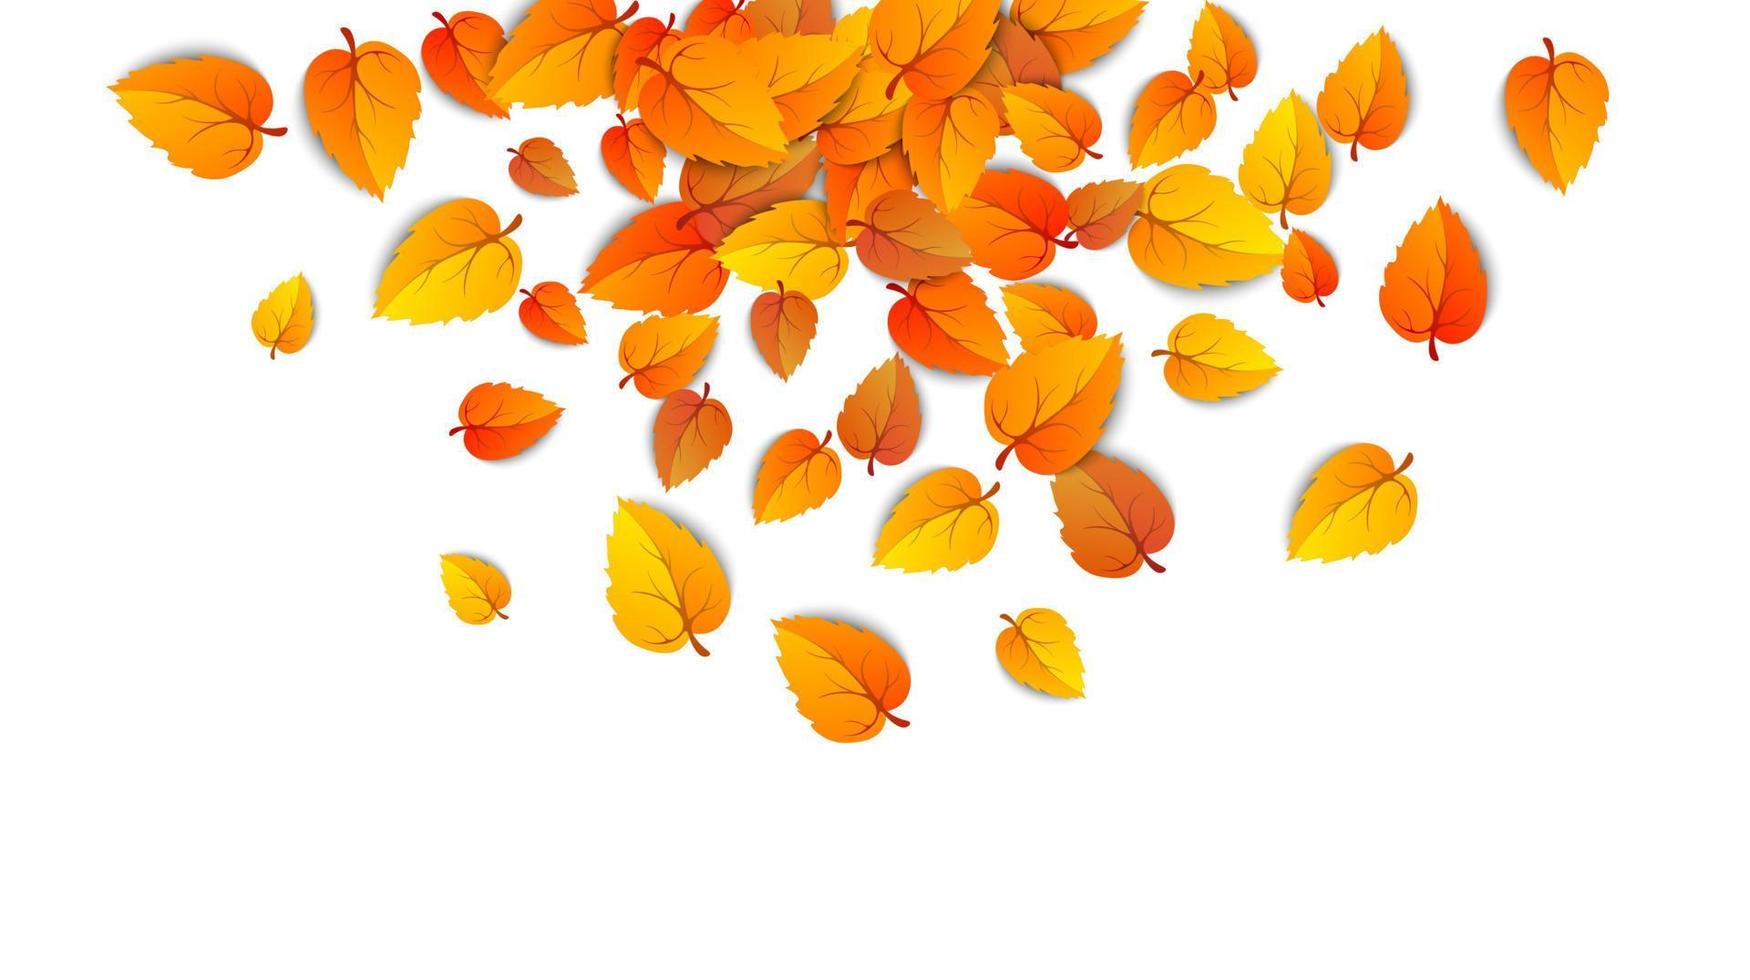 Autumn falling leaves isolated on white background. Autumnal round yellow leaf fall down, Tree foliage and gold leaves. September autumn golden leaf border. Vector illustration eps10